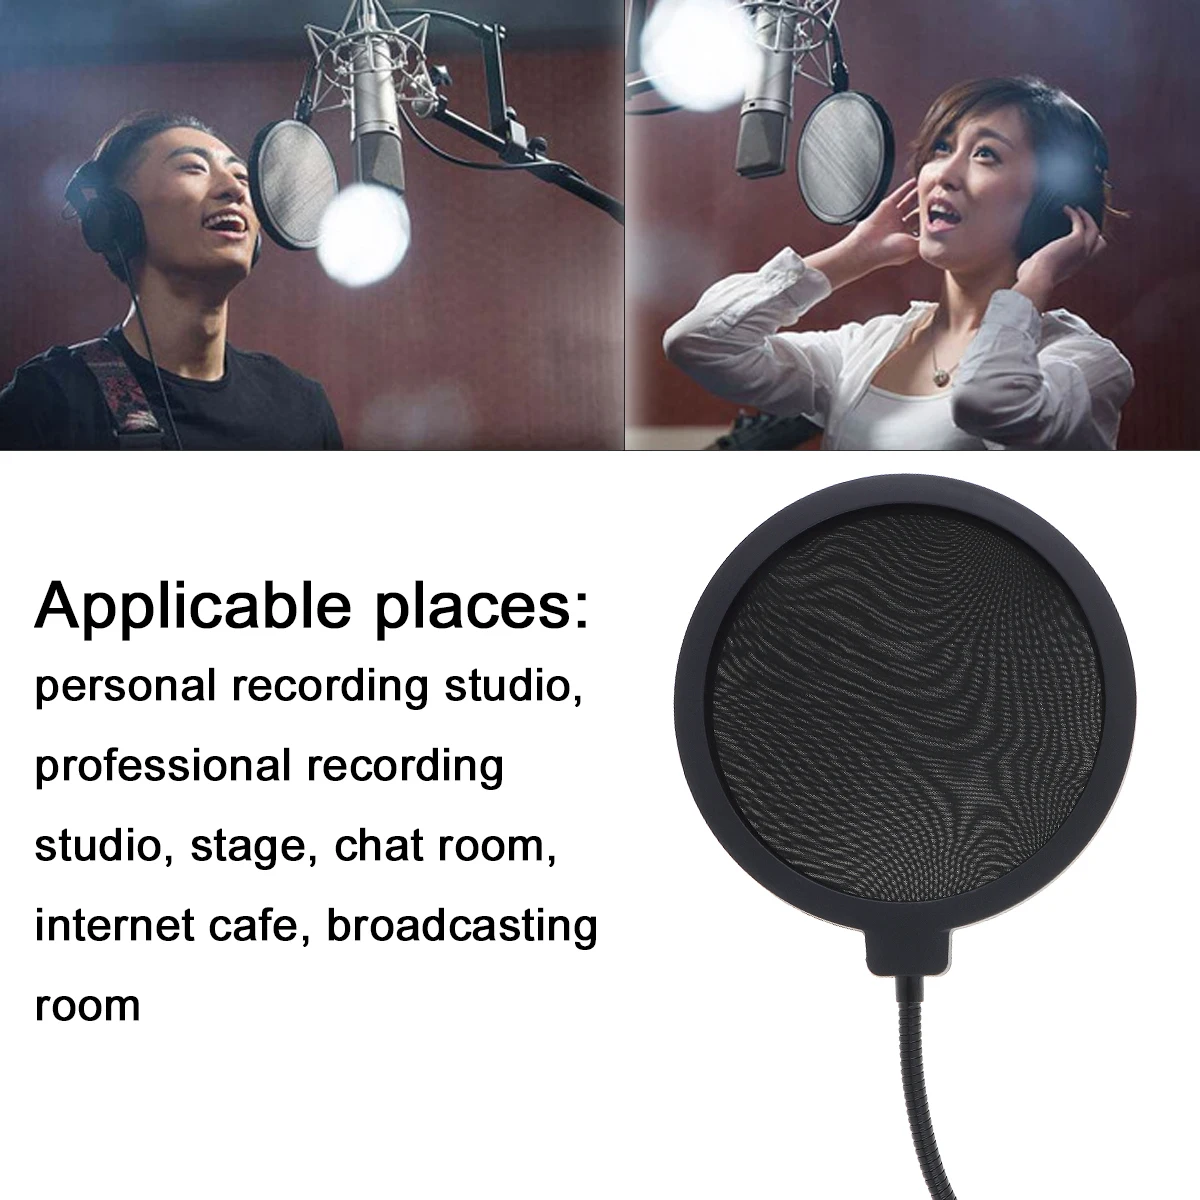 Double Layer Studio Microphone Flexible Wind Screen Mask Mic Pop Filter Shield Black Color for Speaking Recording Accessories images - 6